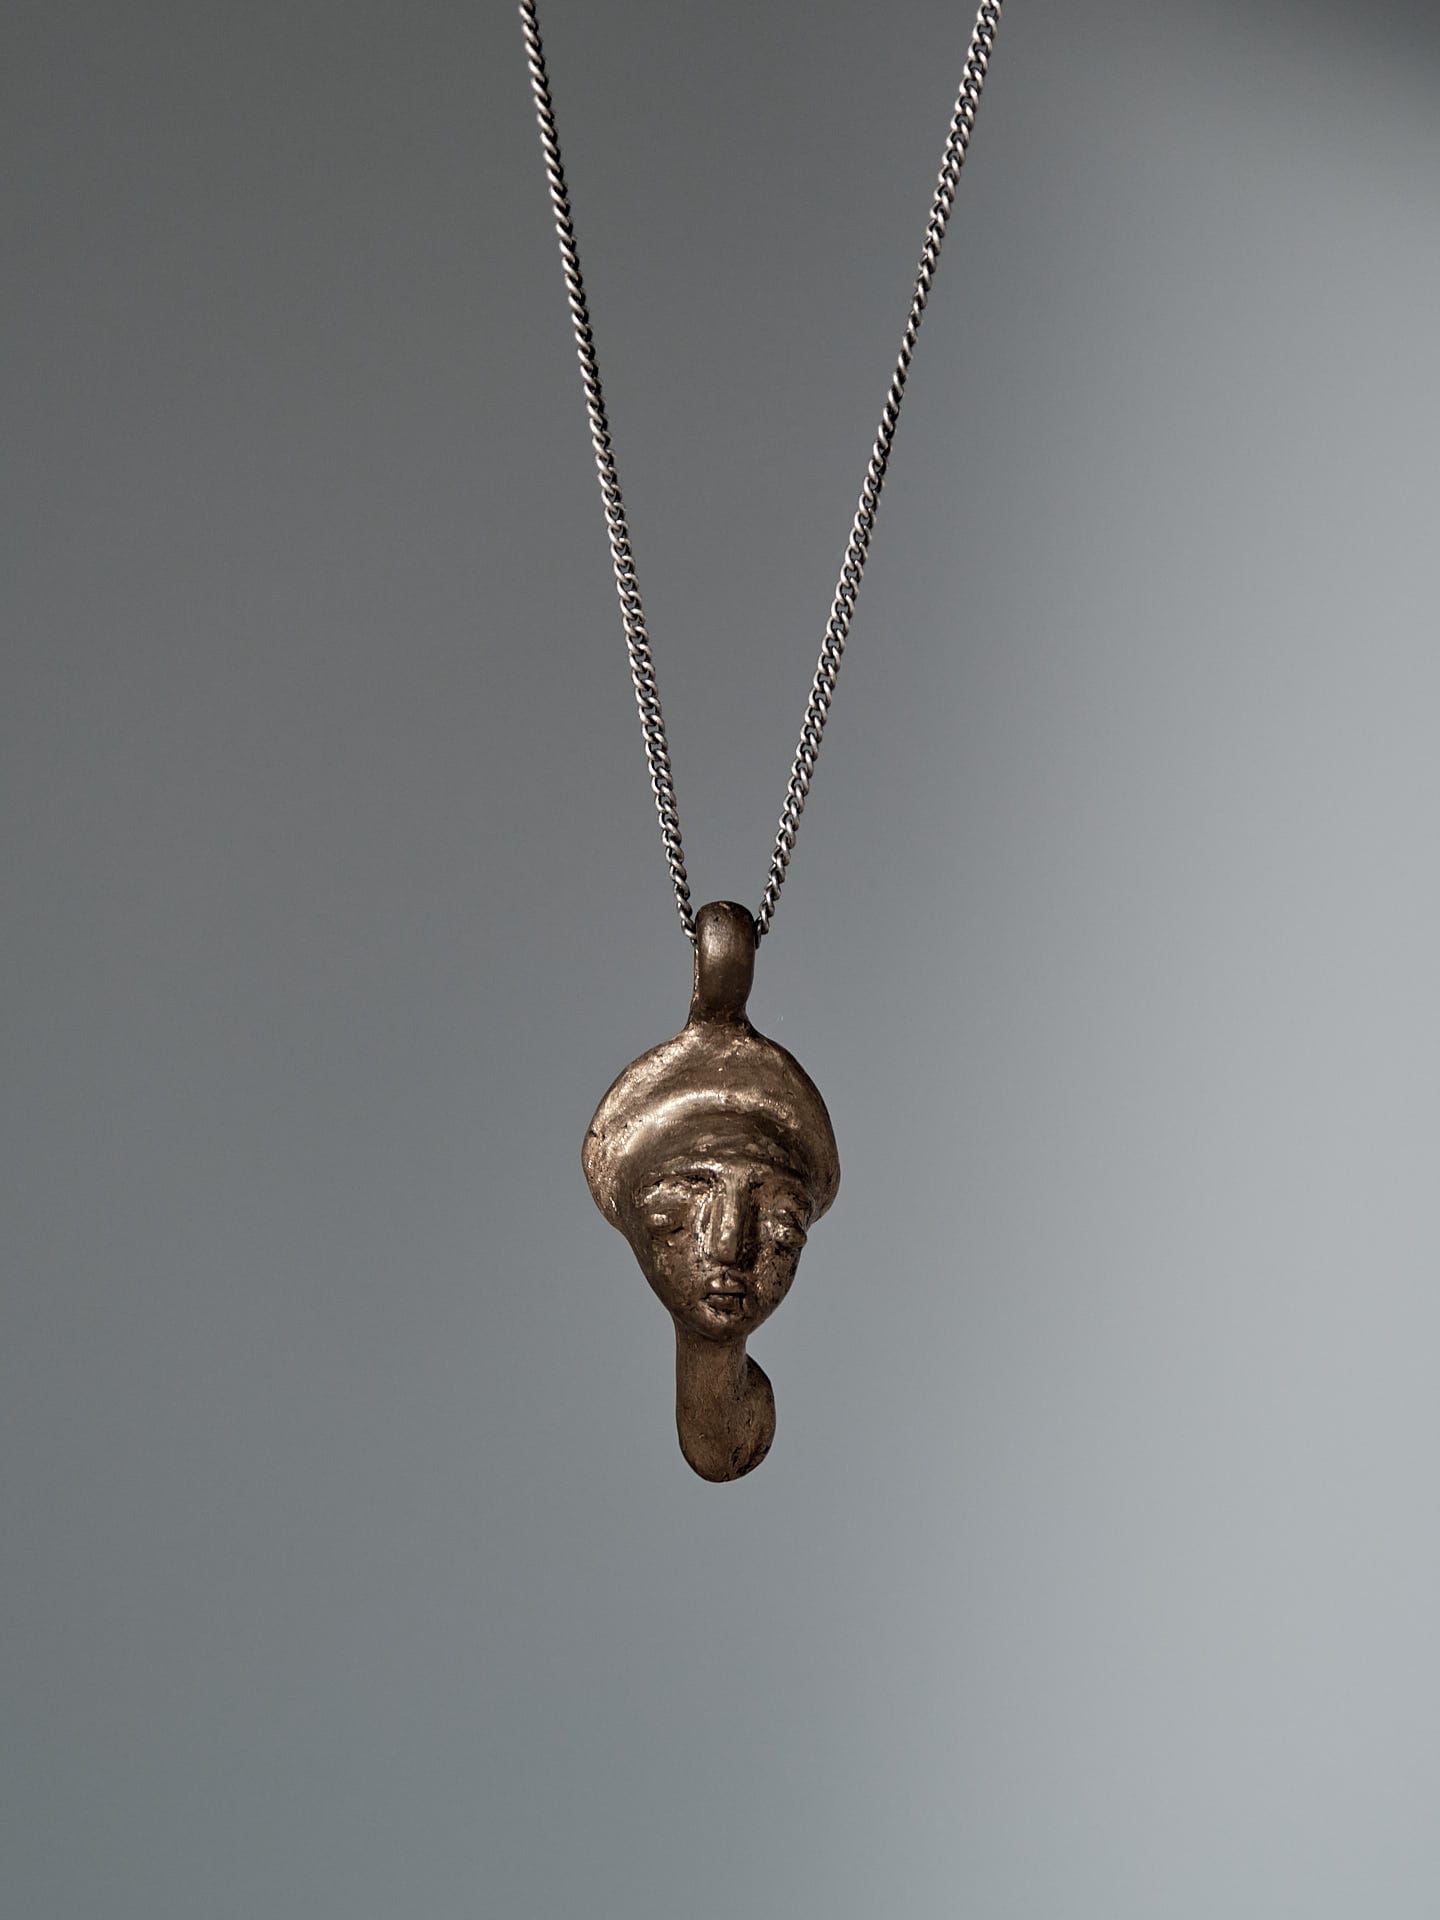 A Talisman Pendant necklace with a bronze head on it by Tamara Rookes.